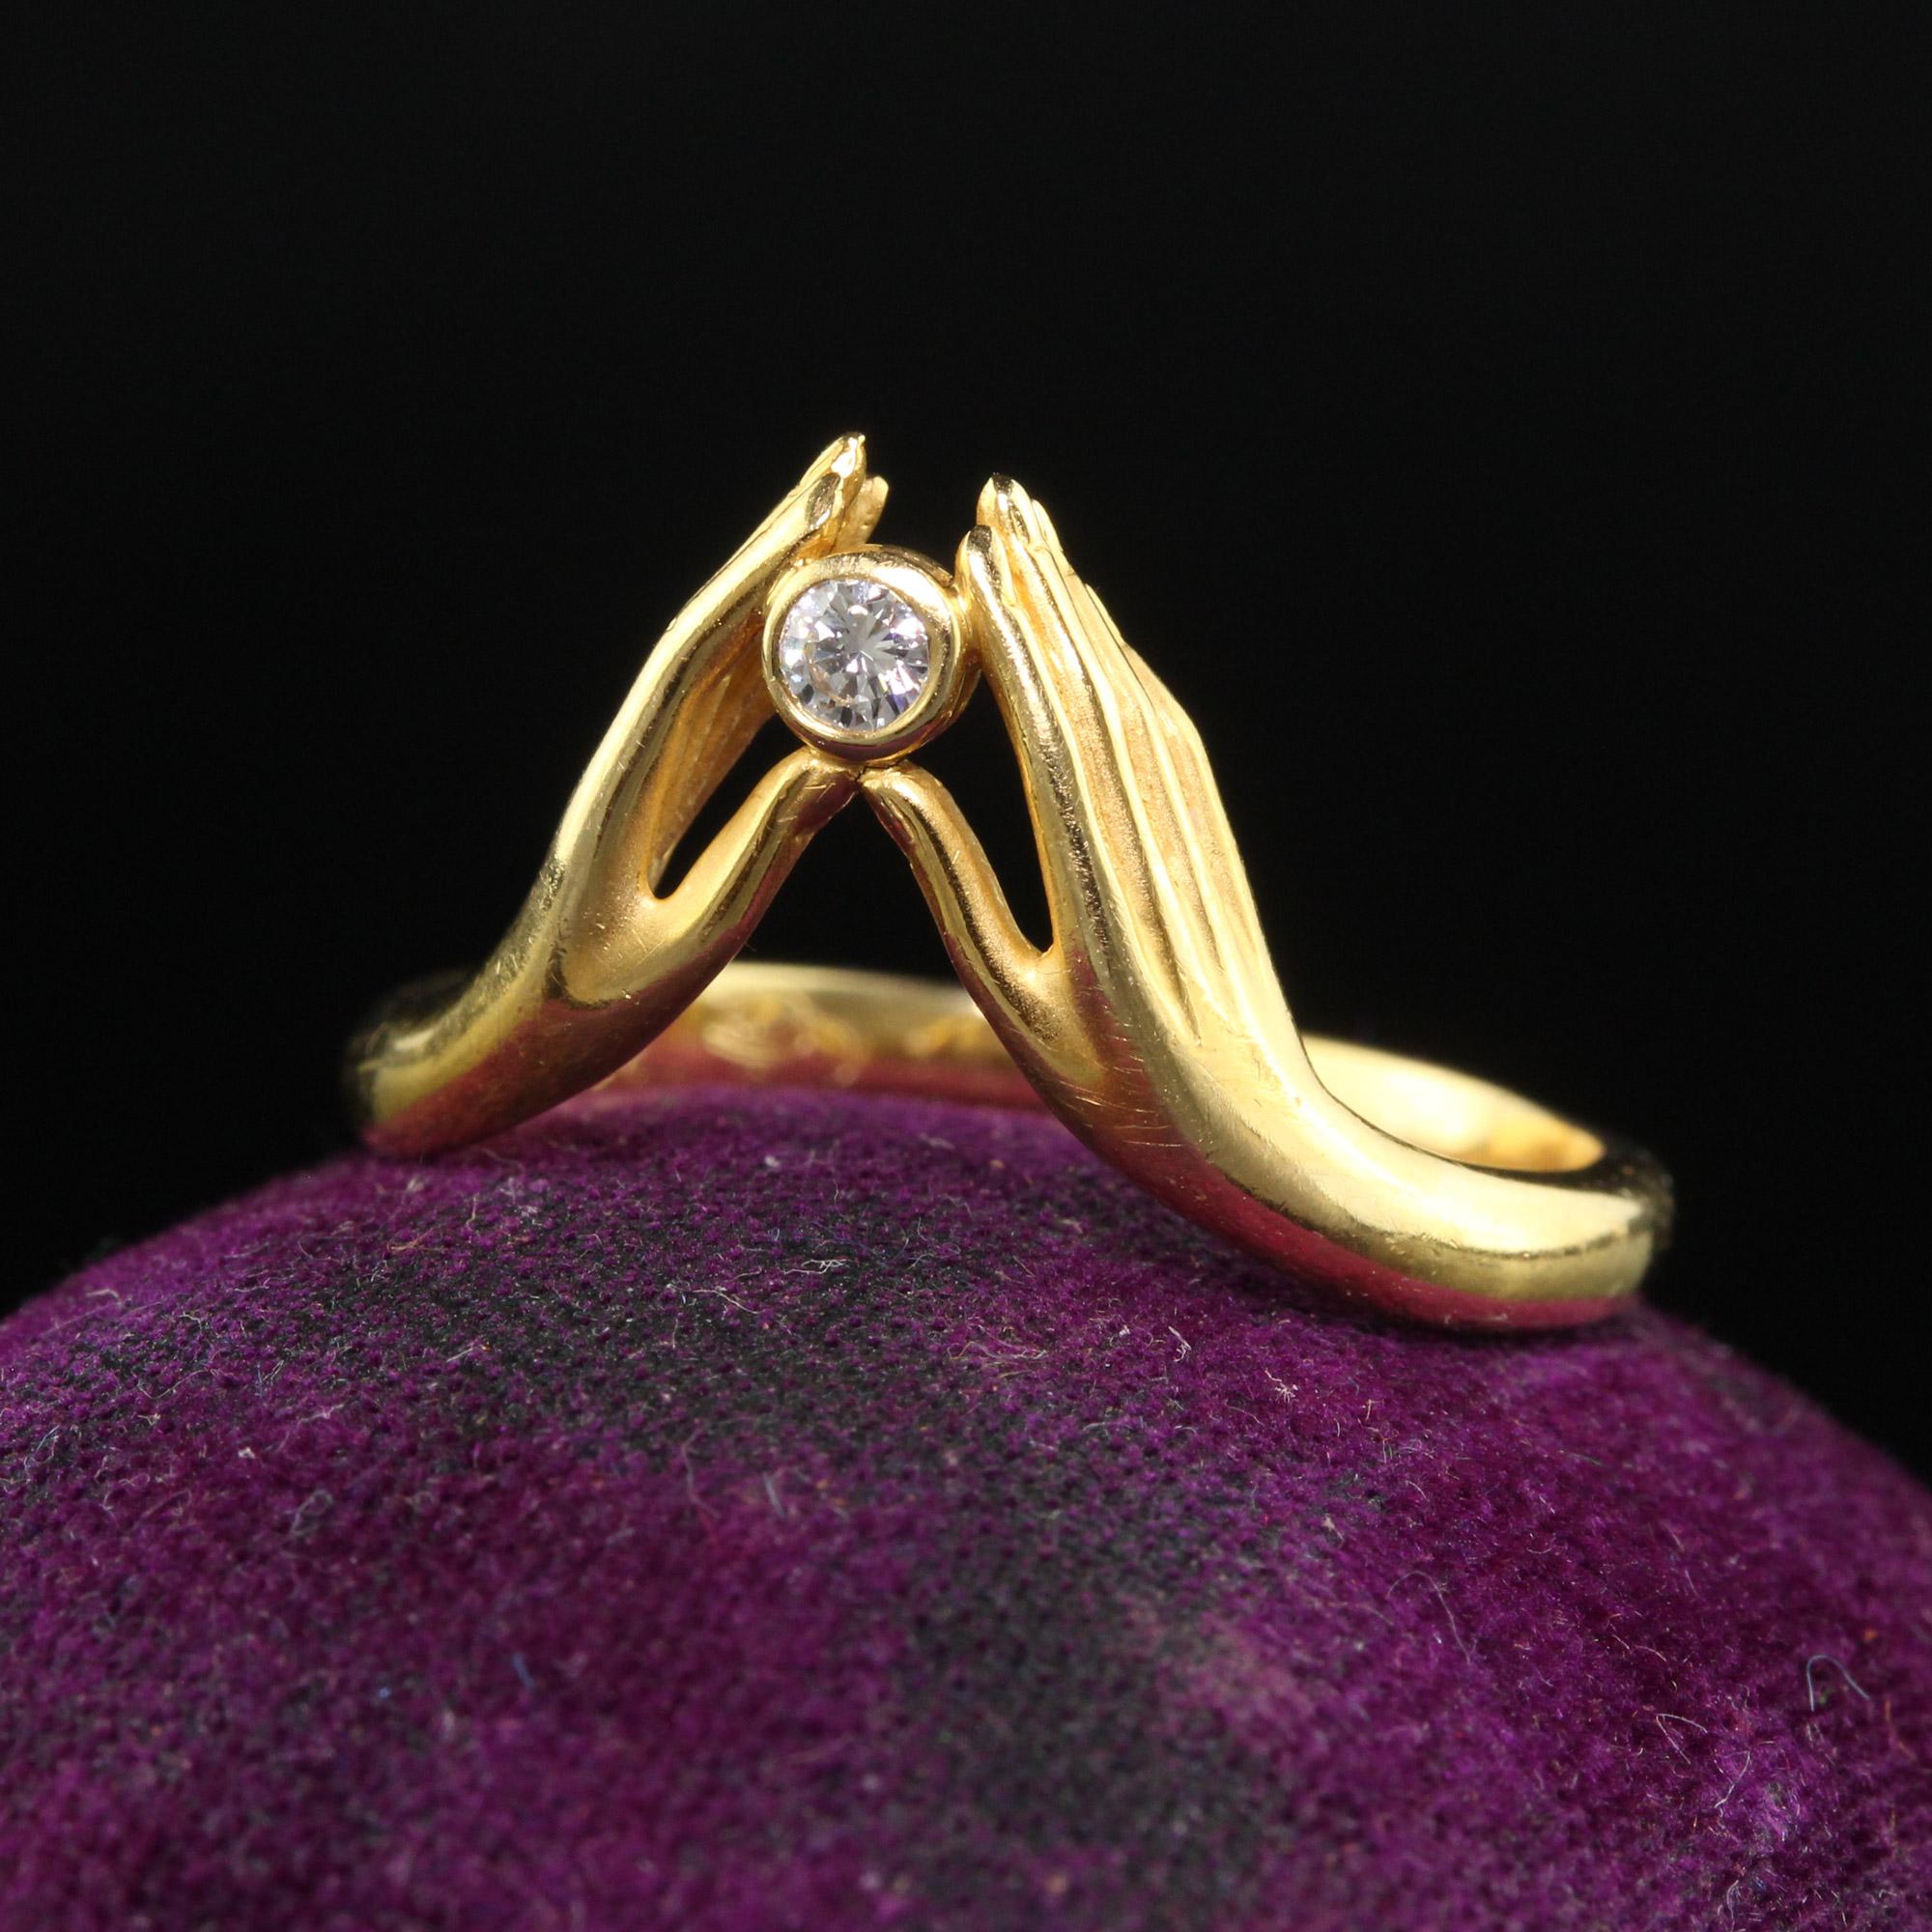 Beautiful Vintage Estate Carrera Y Carrera 18K Yellow Gold Diamond Hand Ring. This beautiful Carrera Y Carrera ring is crafted in 18k yellow gold. The center holds a white round diamond that is bezel set with two hands holding it up. The ring is in